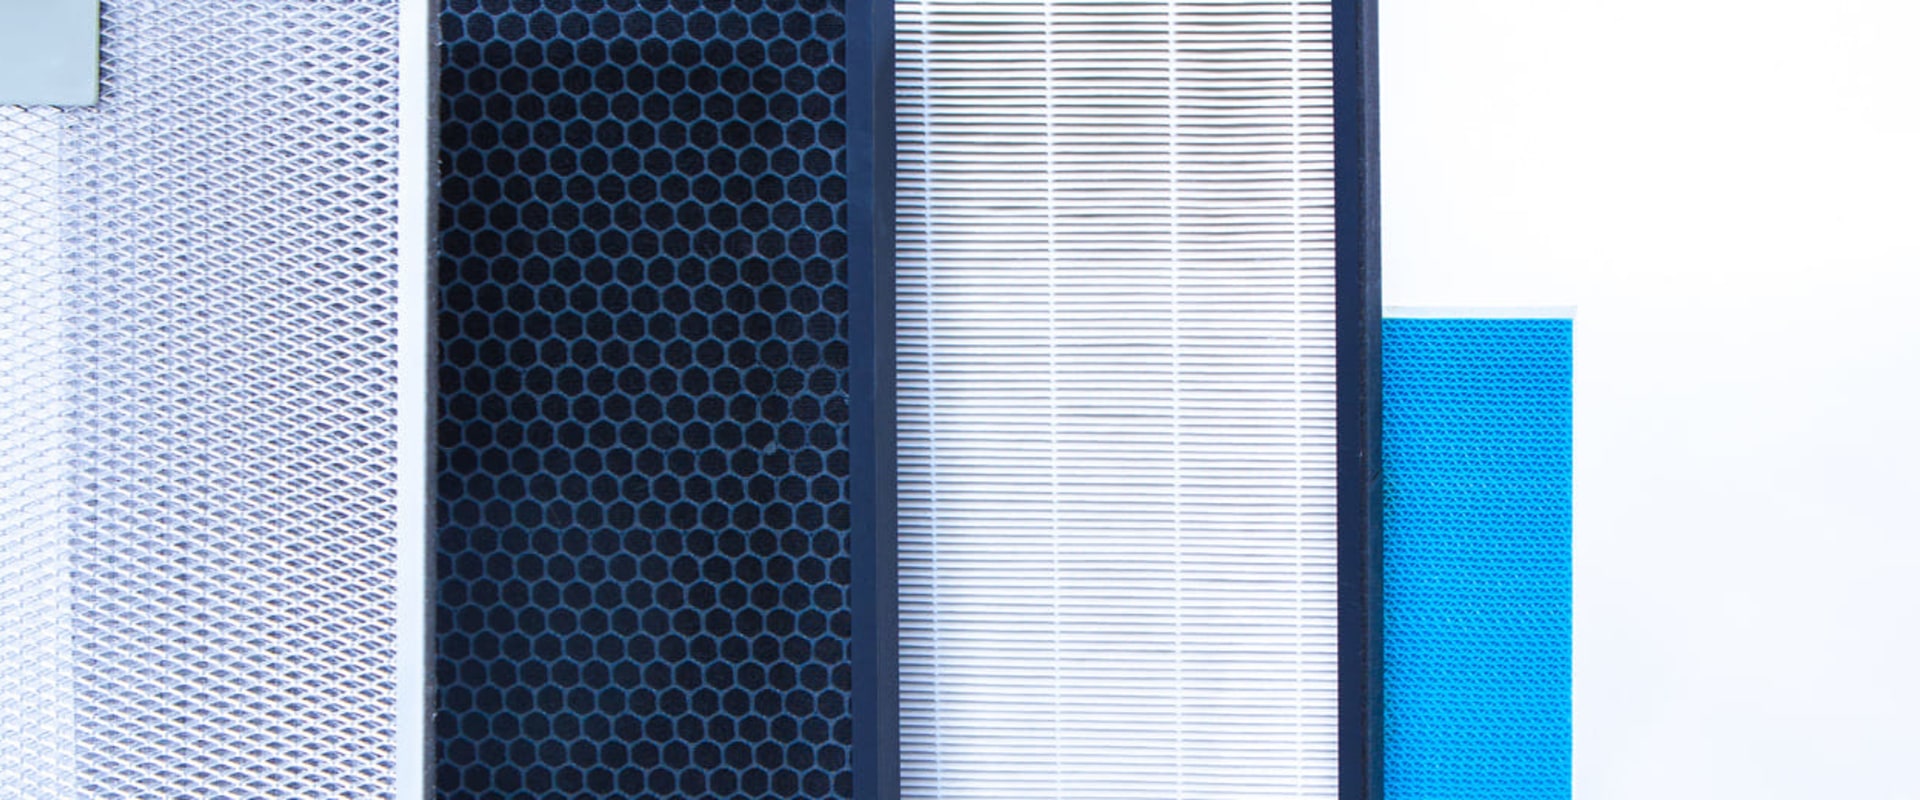 HEPA vs Carbon Filters: Which is Better for Air Purification?